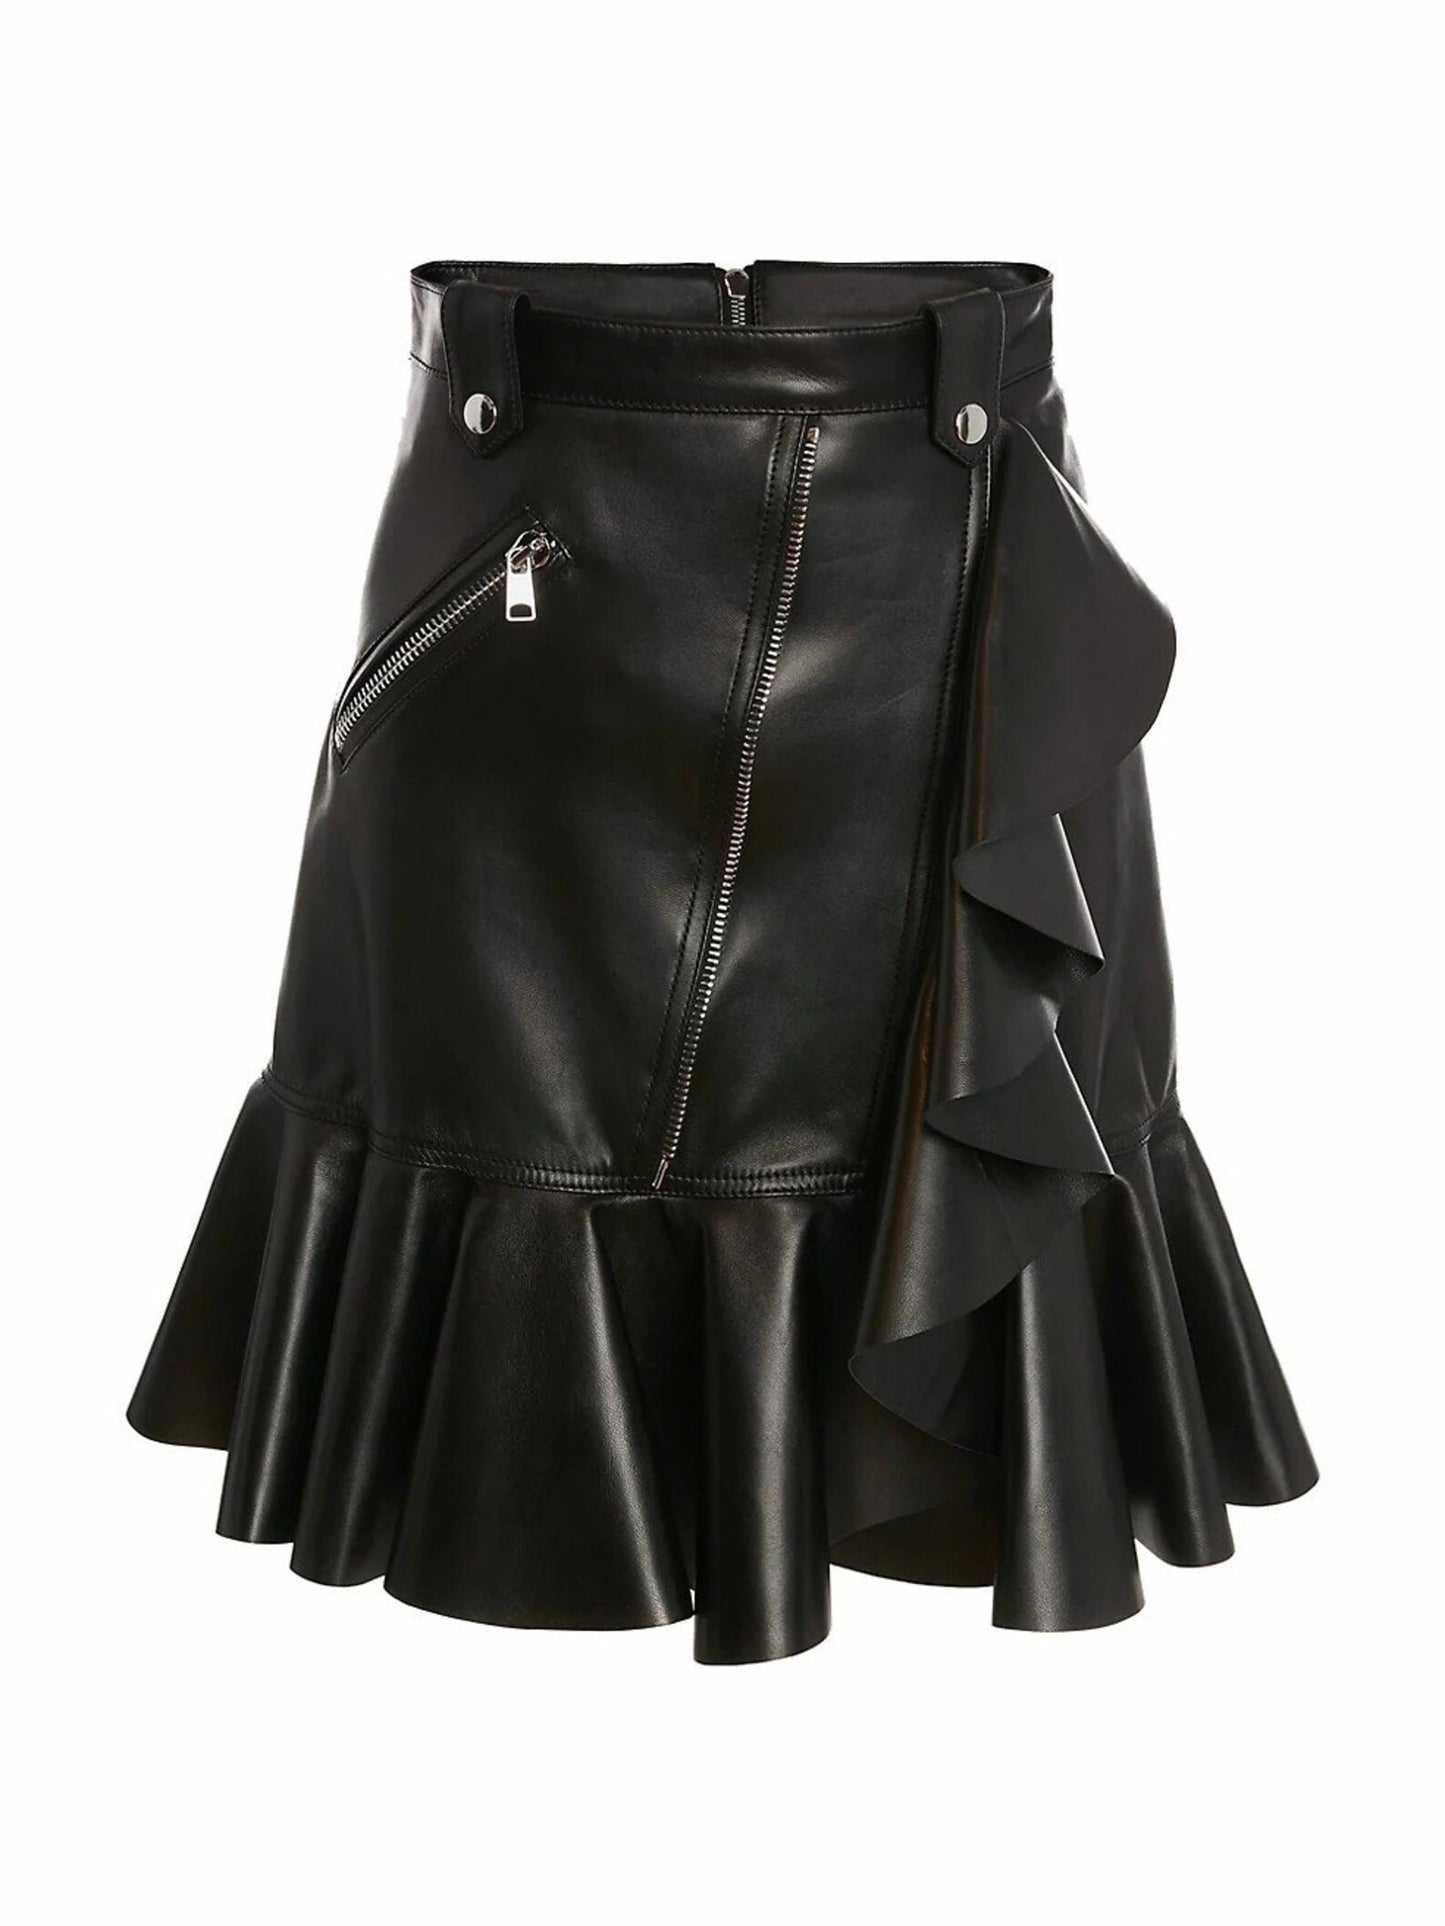 Handmade Genuine Leather Skirt Outfit